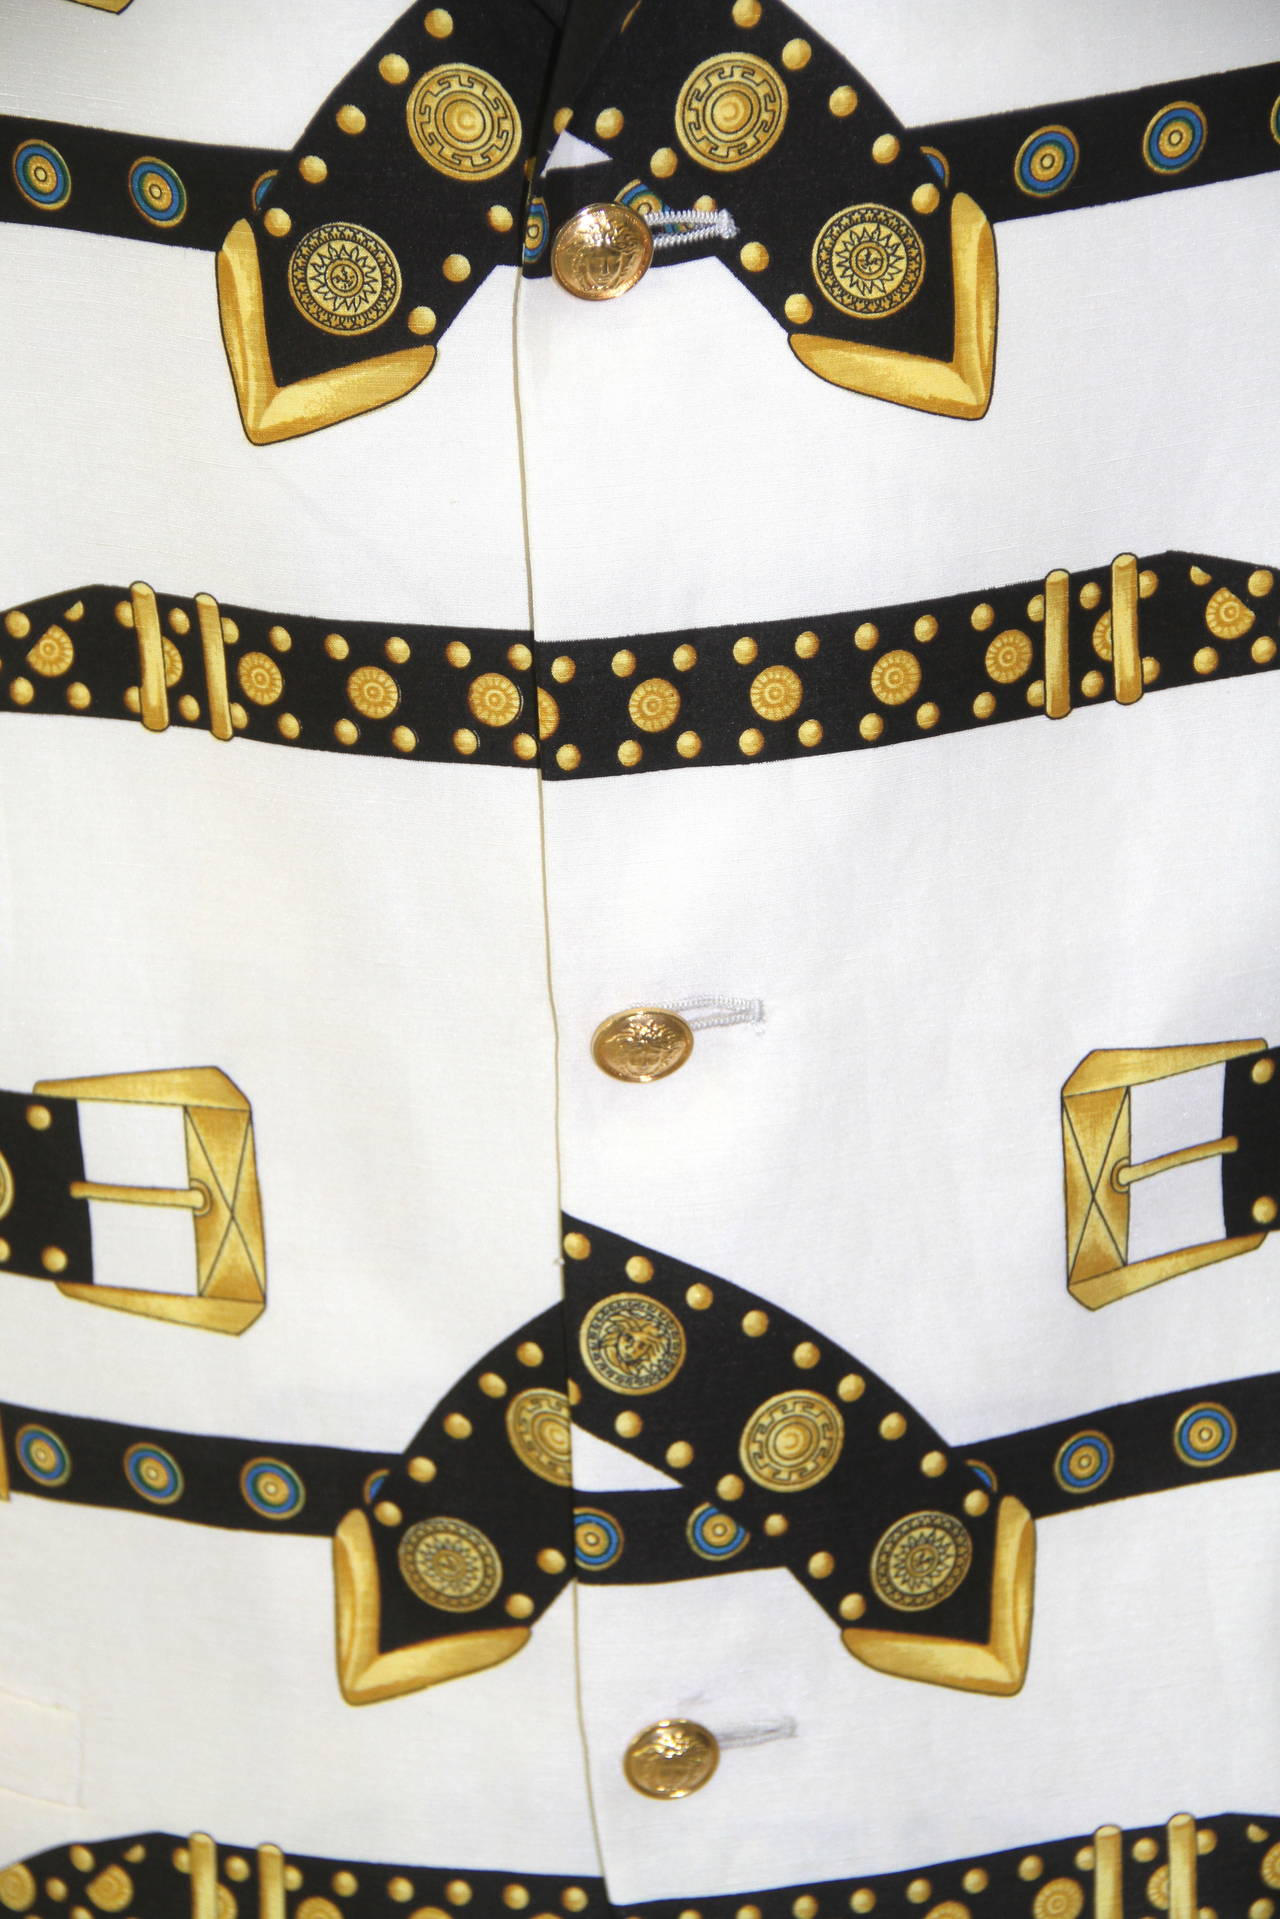 Iconic Gianni Versace studded belt print linen jacket from the Spring 1993 Men's Miami collection.

Unmarked, however, equivalent to an Italian size 50.

Manufacturer - Alias S.p.a.

Fabric content - 100% linen